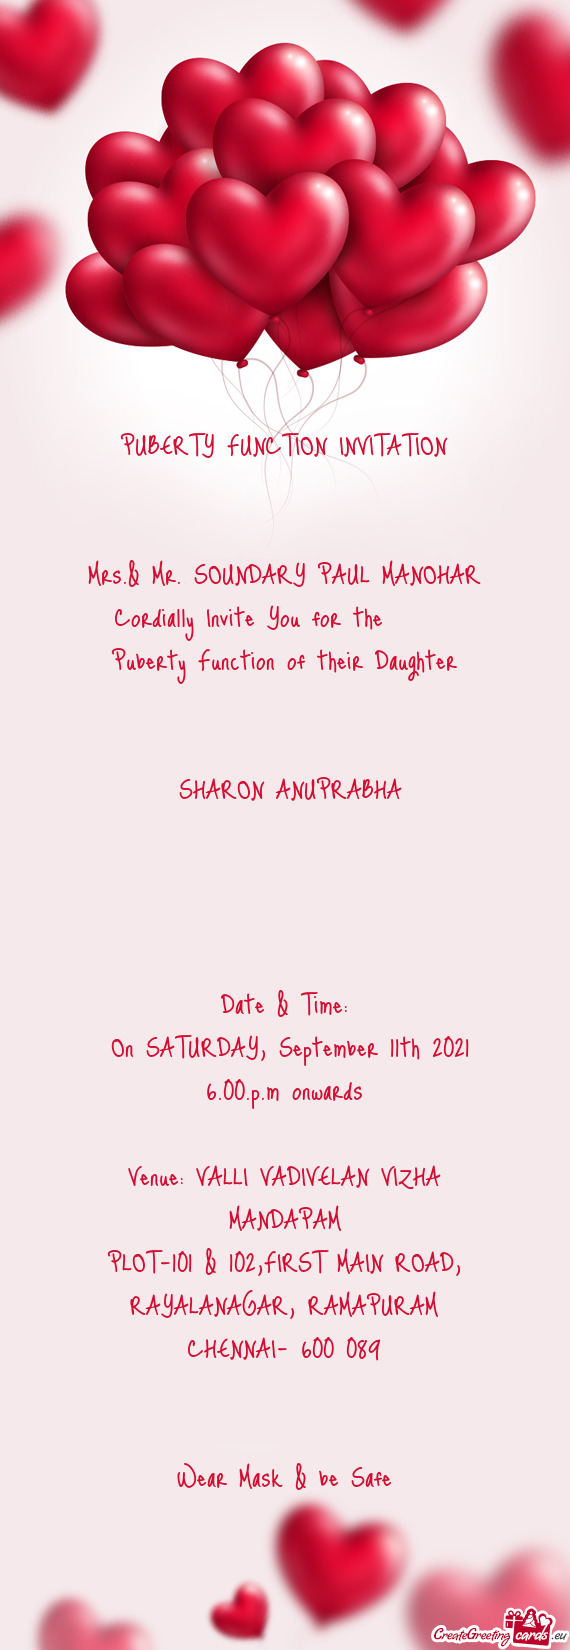 SOUNDARY PAUL MANOHAR
 Cordially Invite You for the  
 Puberty Function of their Daughter